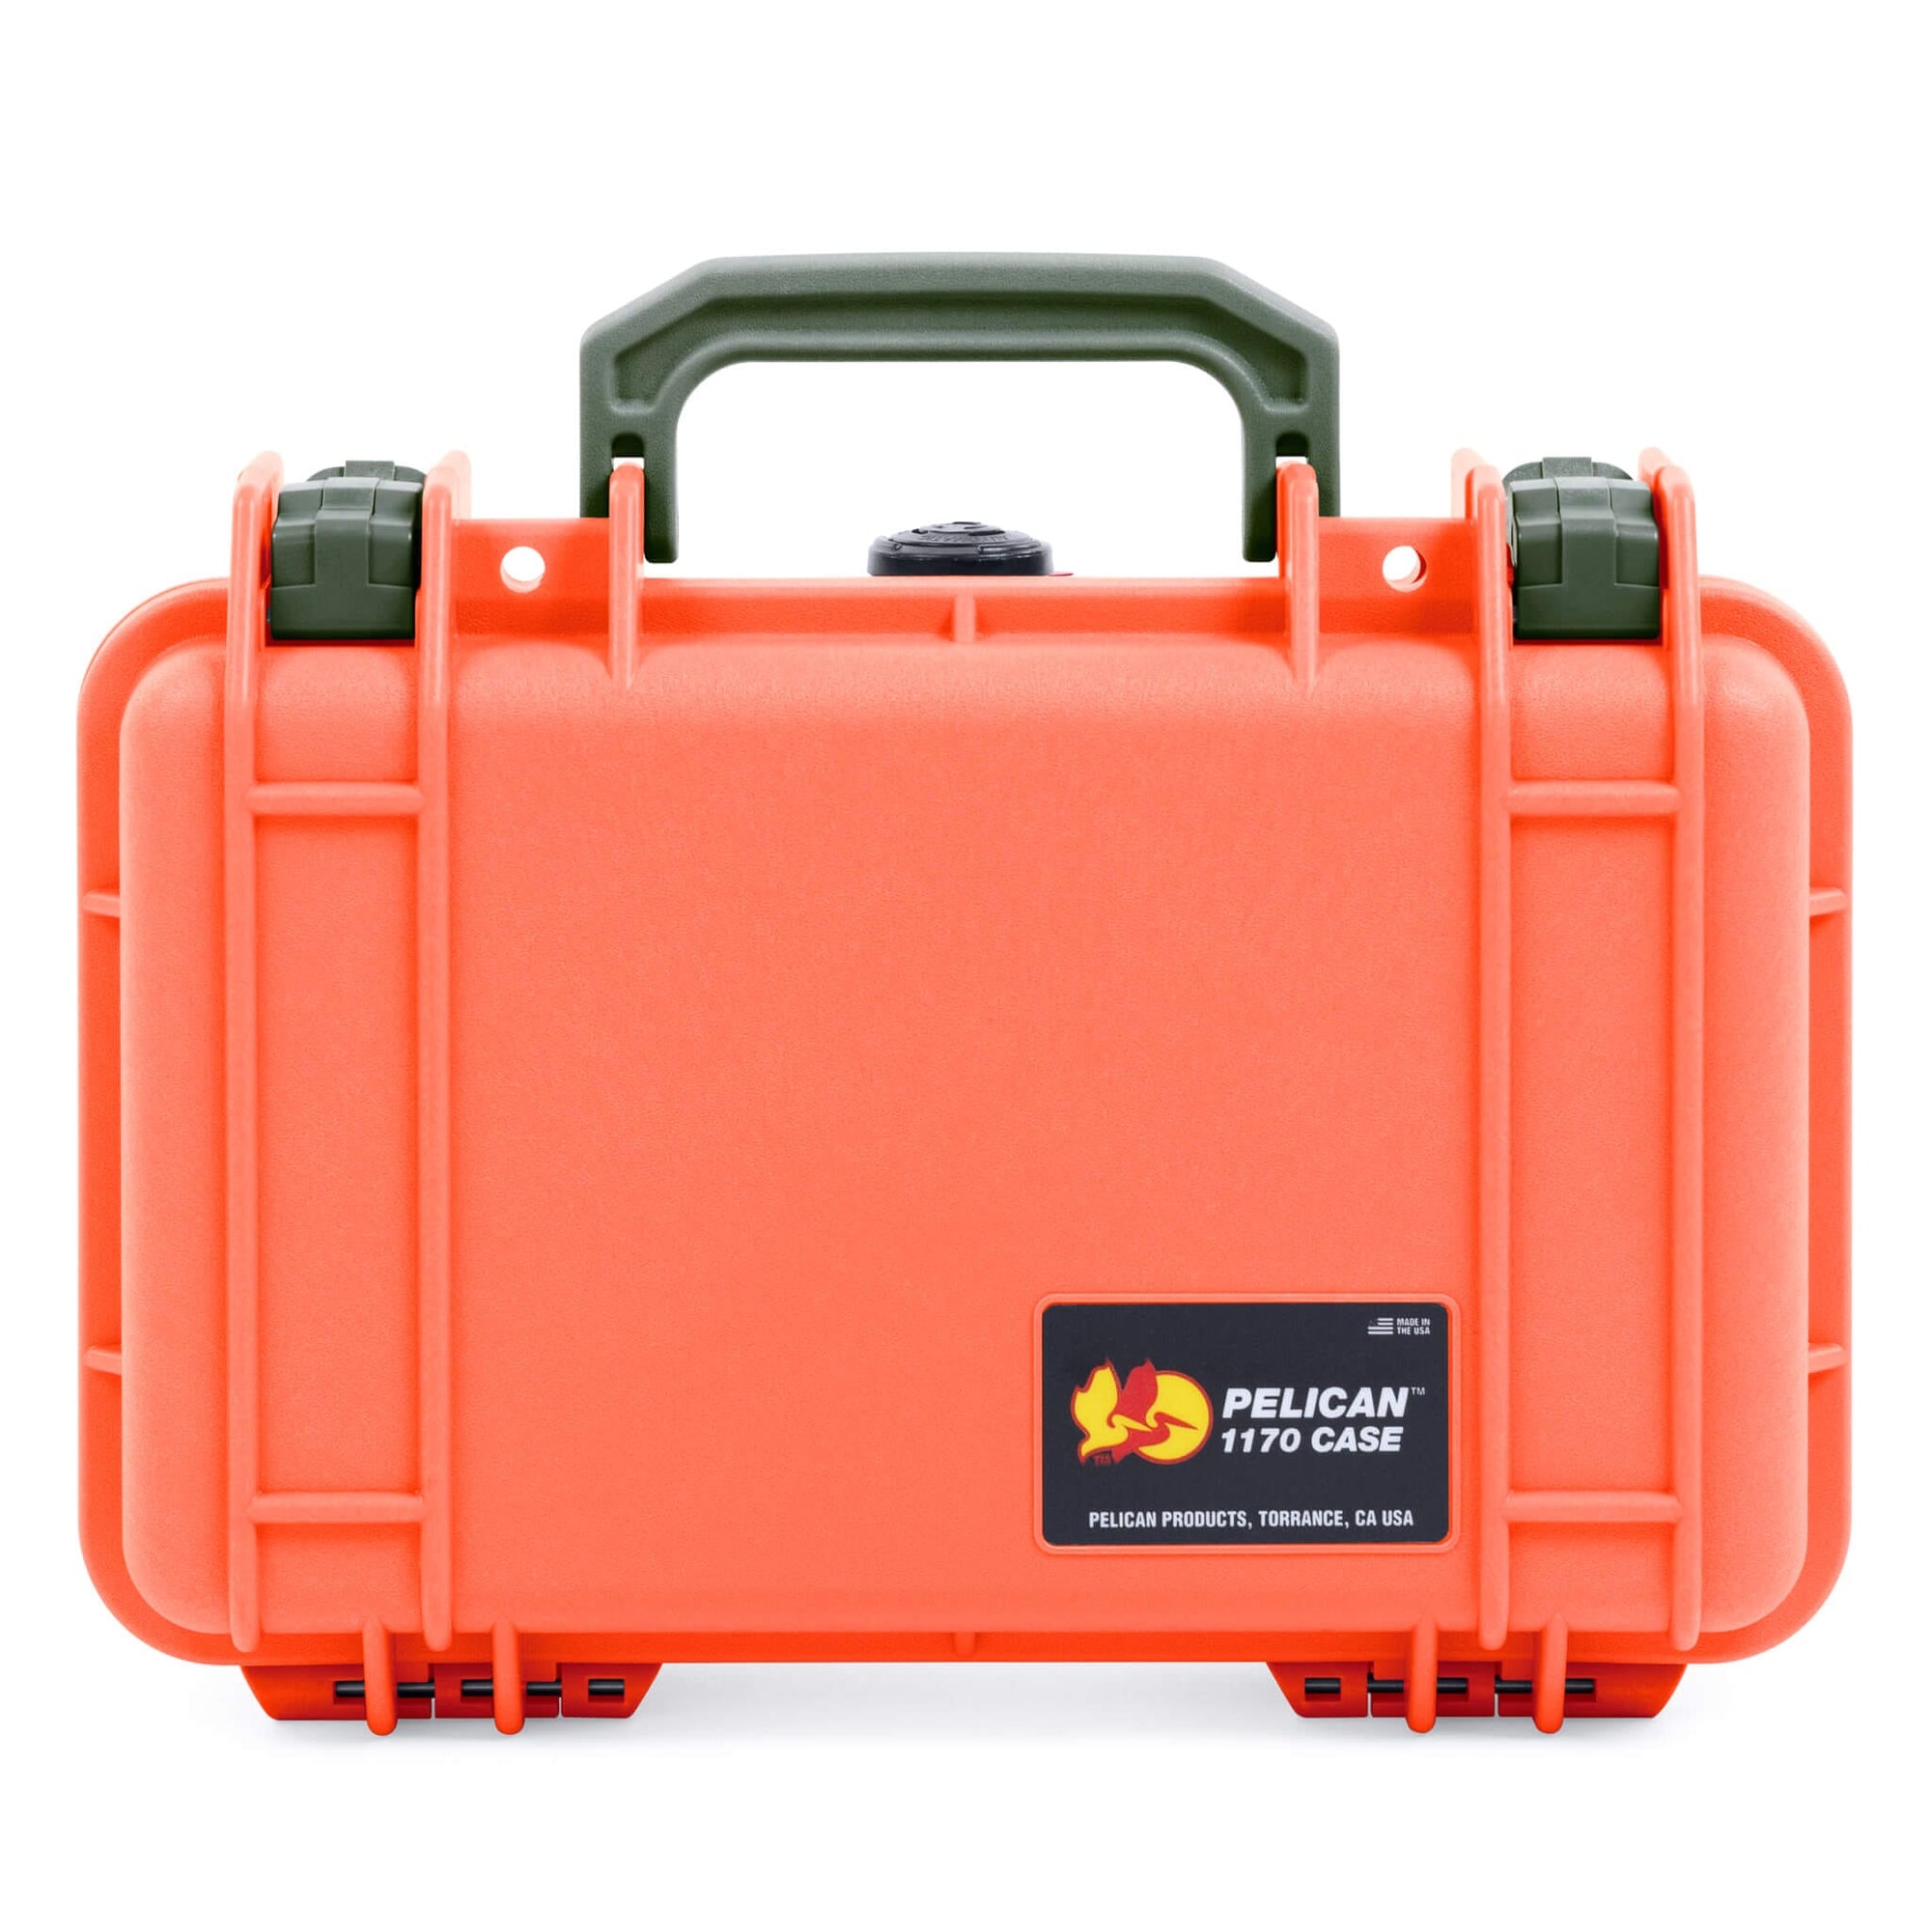 Pelican 1170 Case, Orange with OD Green Handle & Latches ColorCase 